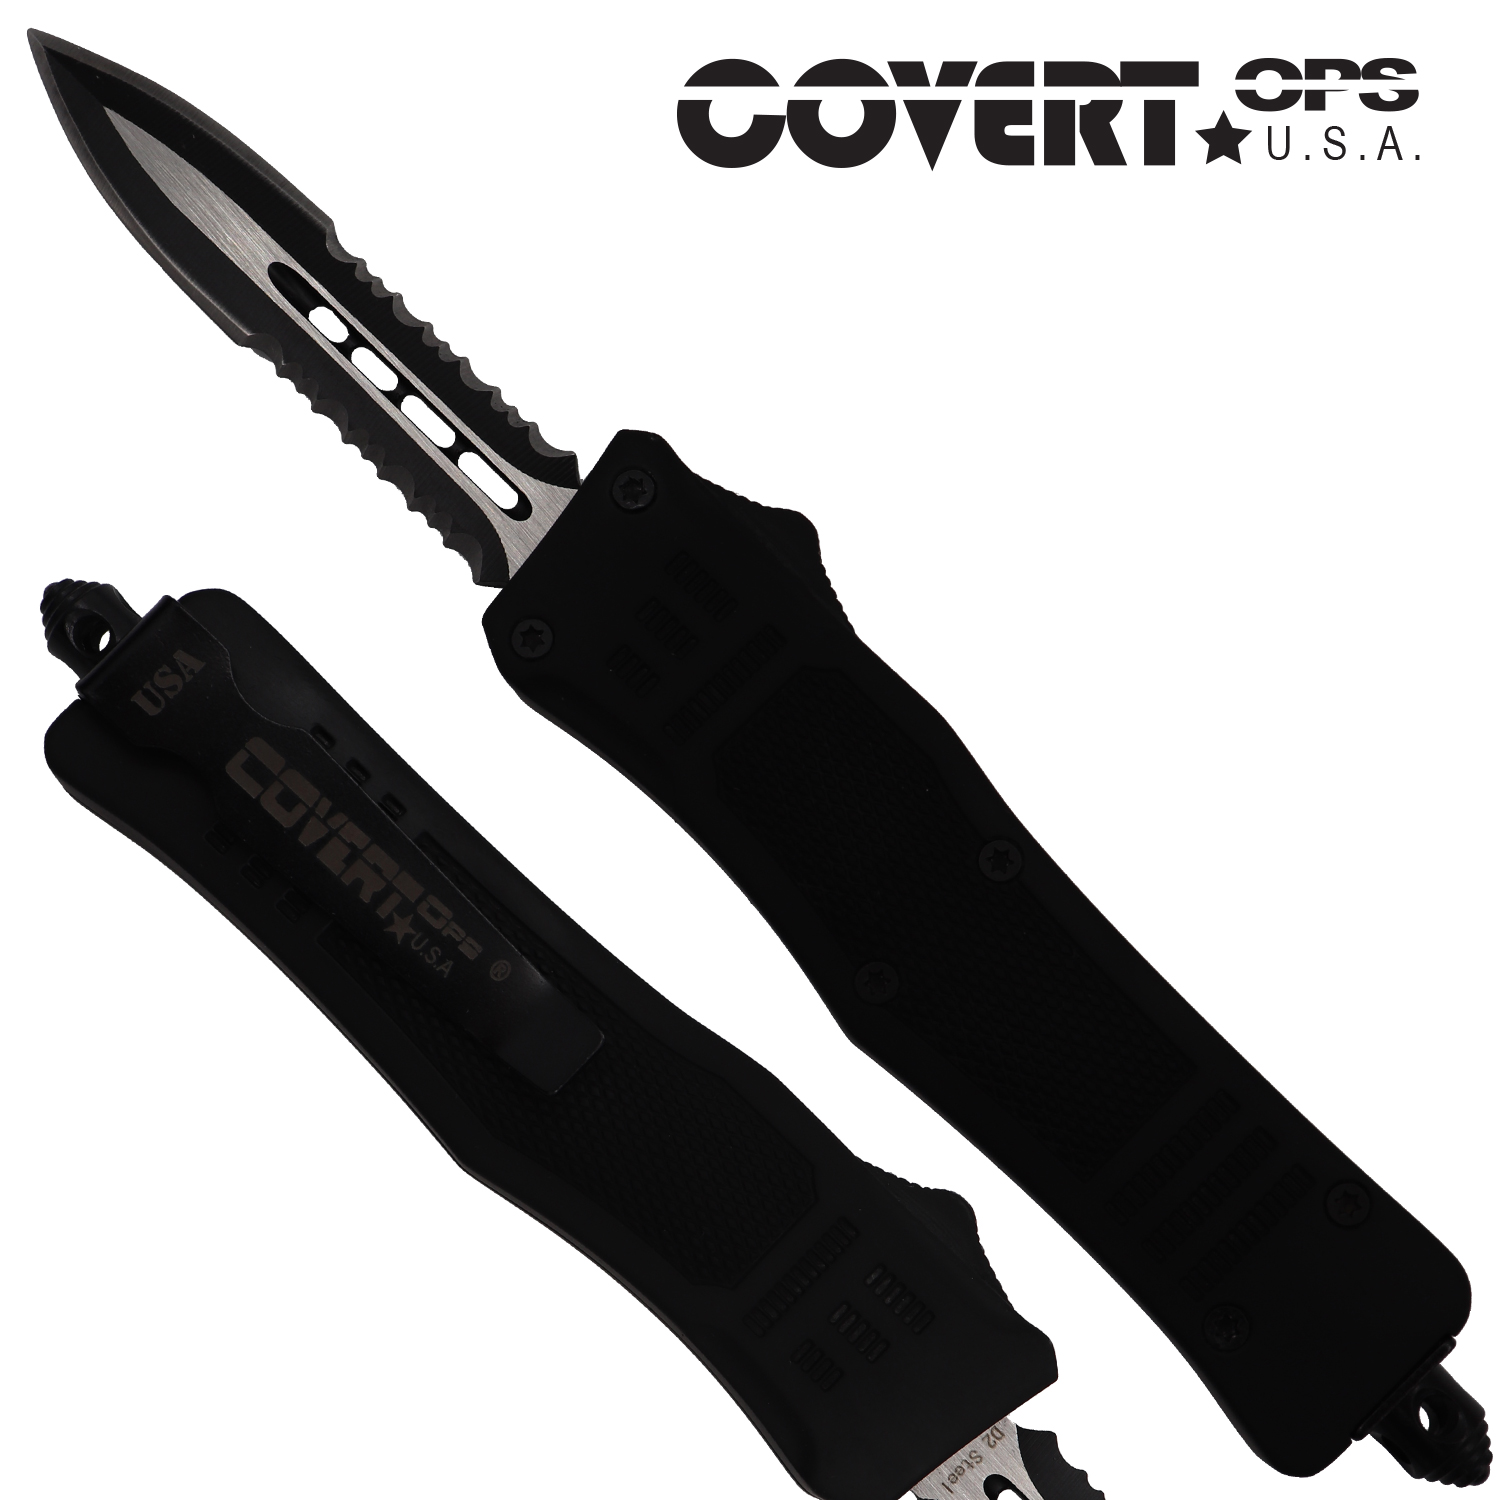 Covert OPS USA OTF Automatic Knife 7 inch overall Black Handle Two Tone Double Edge D2 Steel Blade